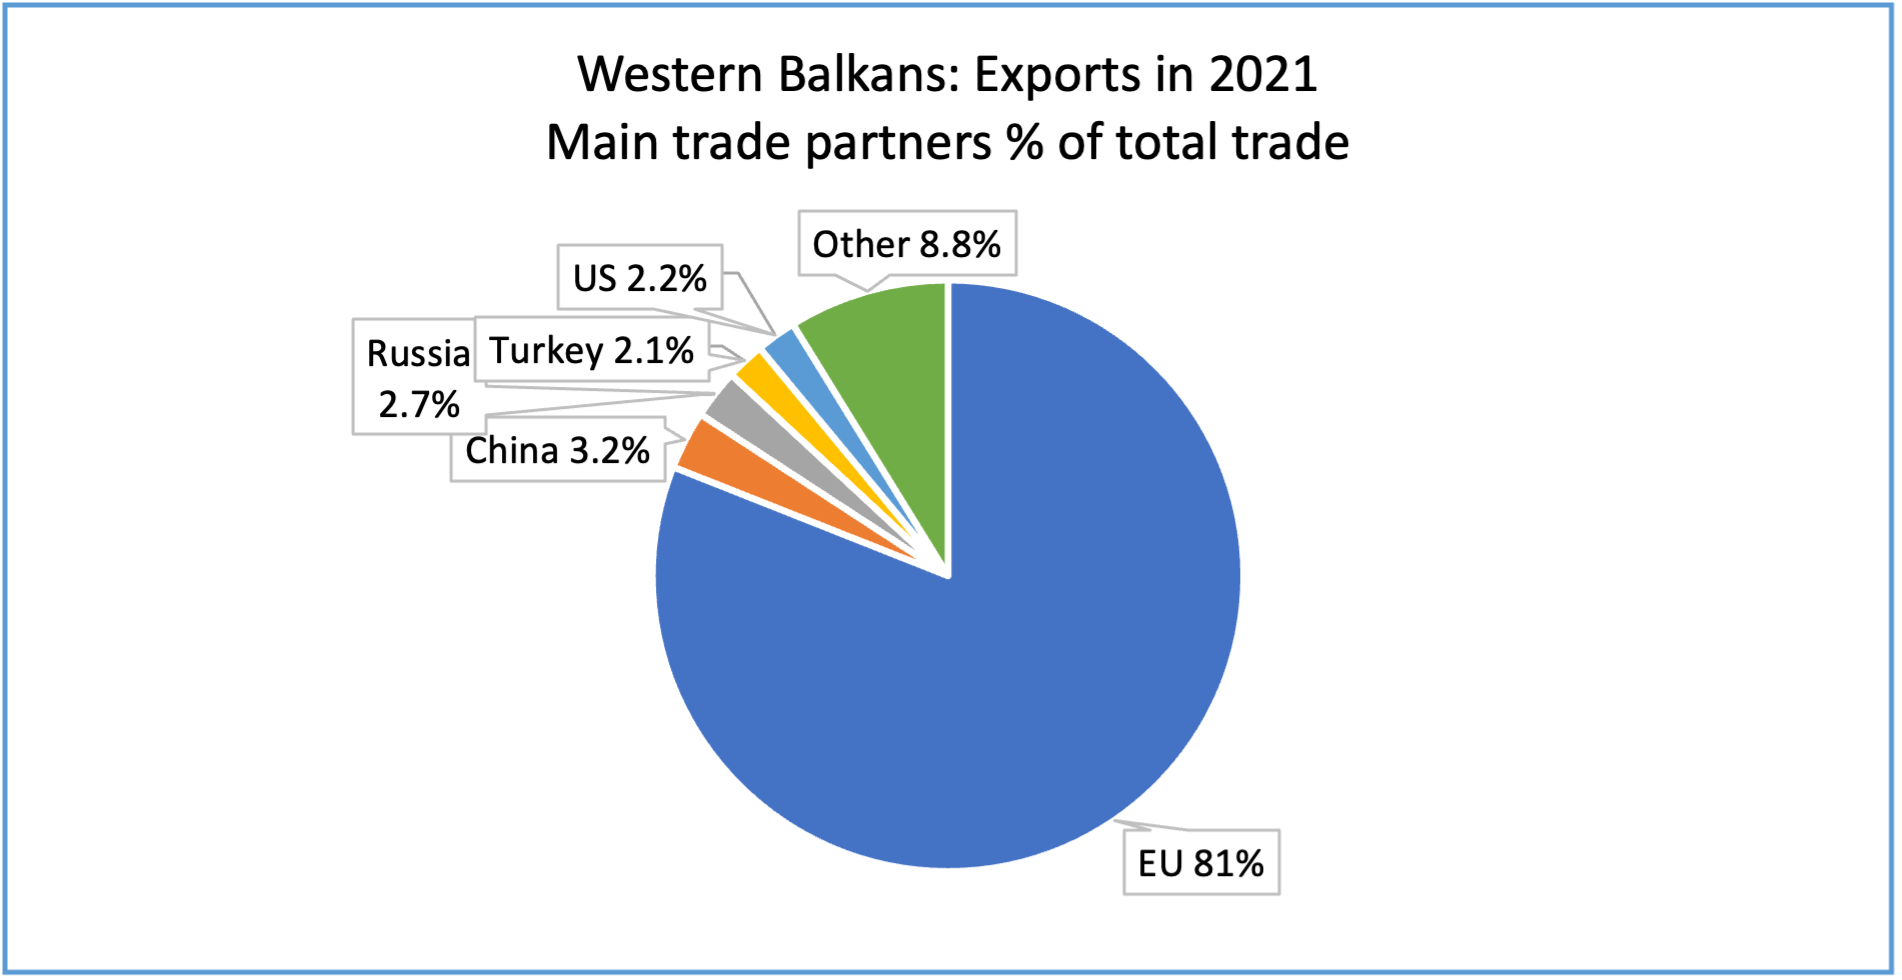 Western Balkans: Main Trade Partners in 2021 (Exports as % of total)